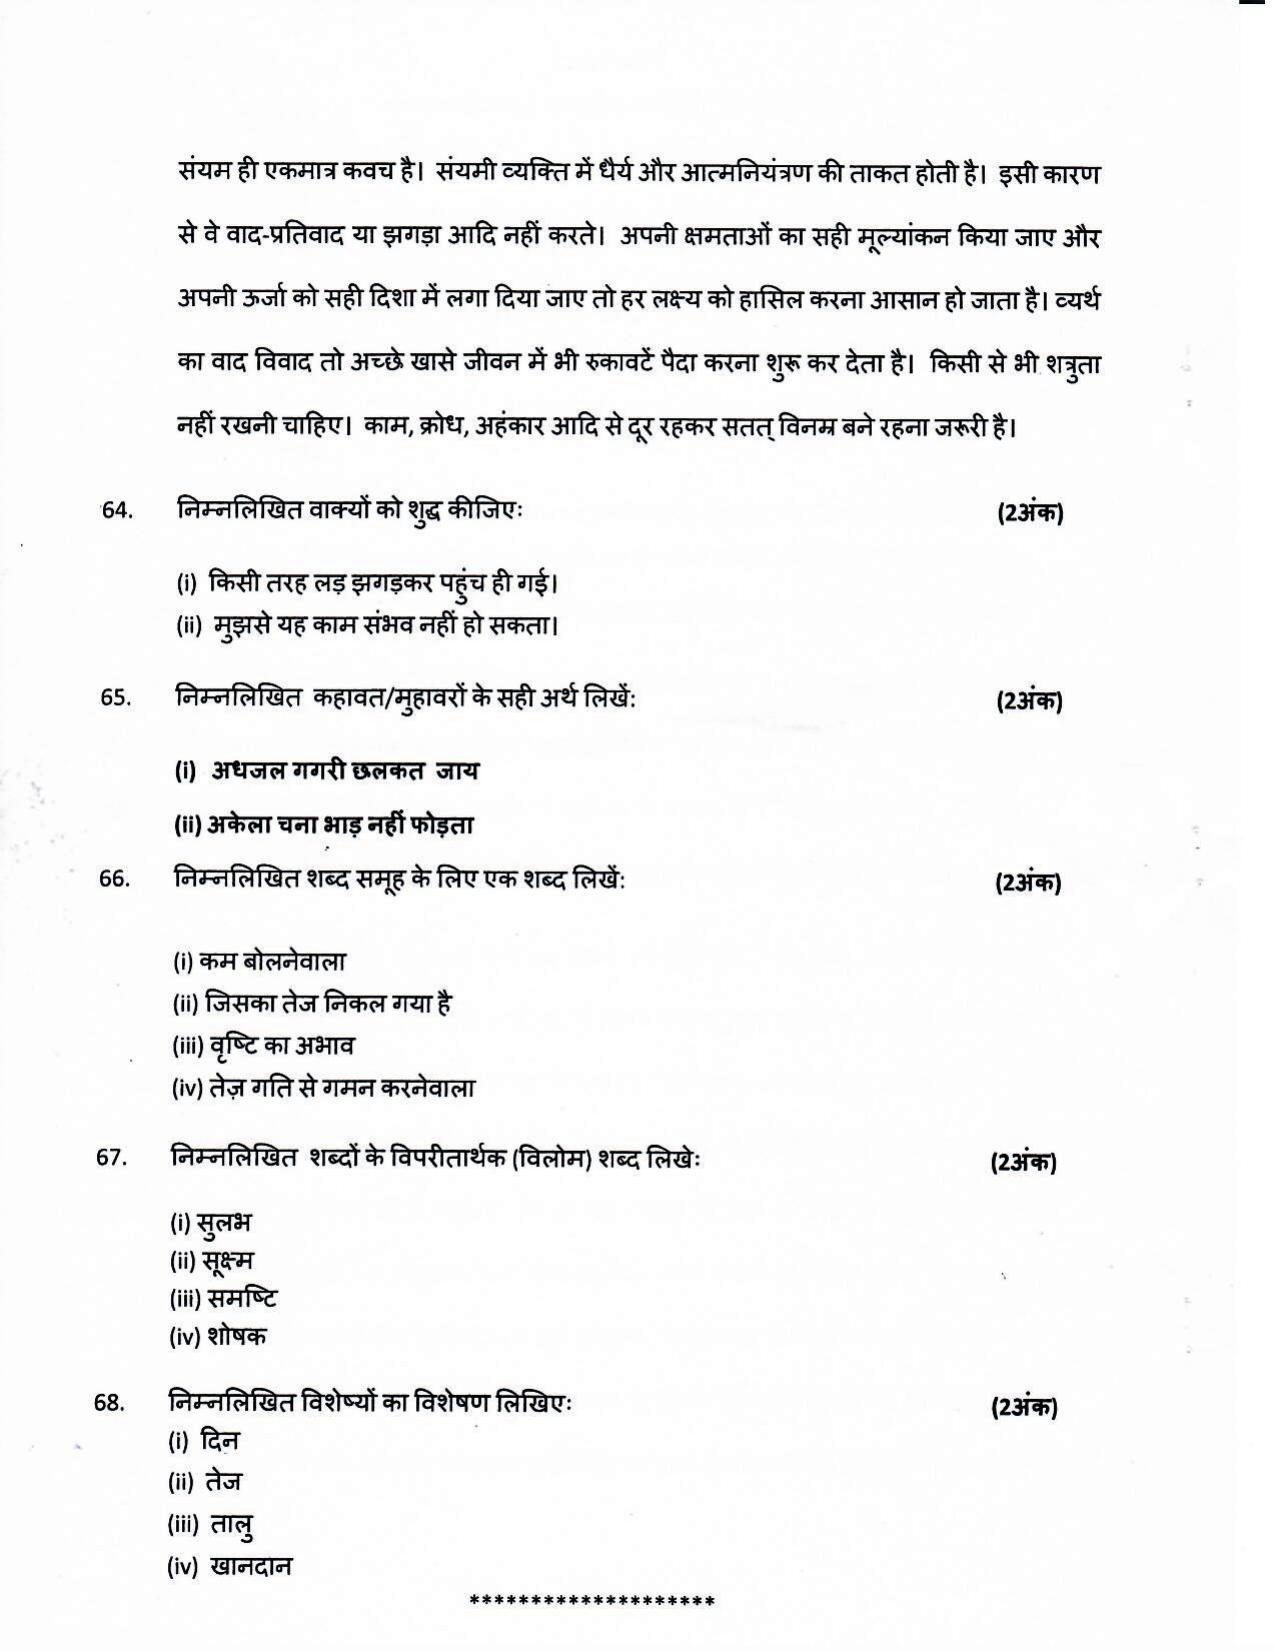 LPSC Hindi Typist 2020 Question Paper - Page 11